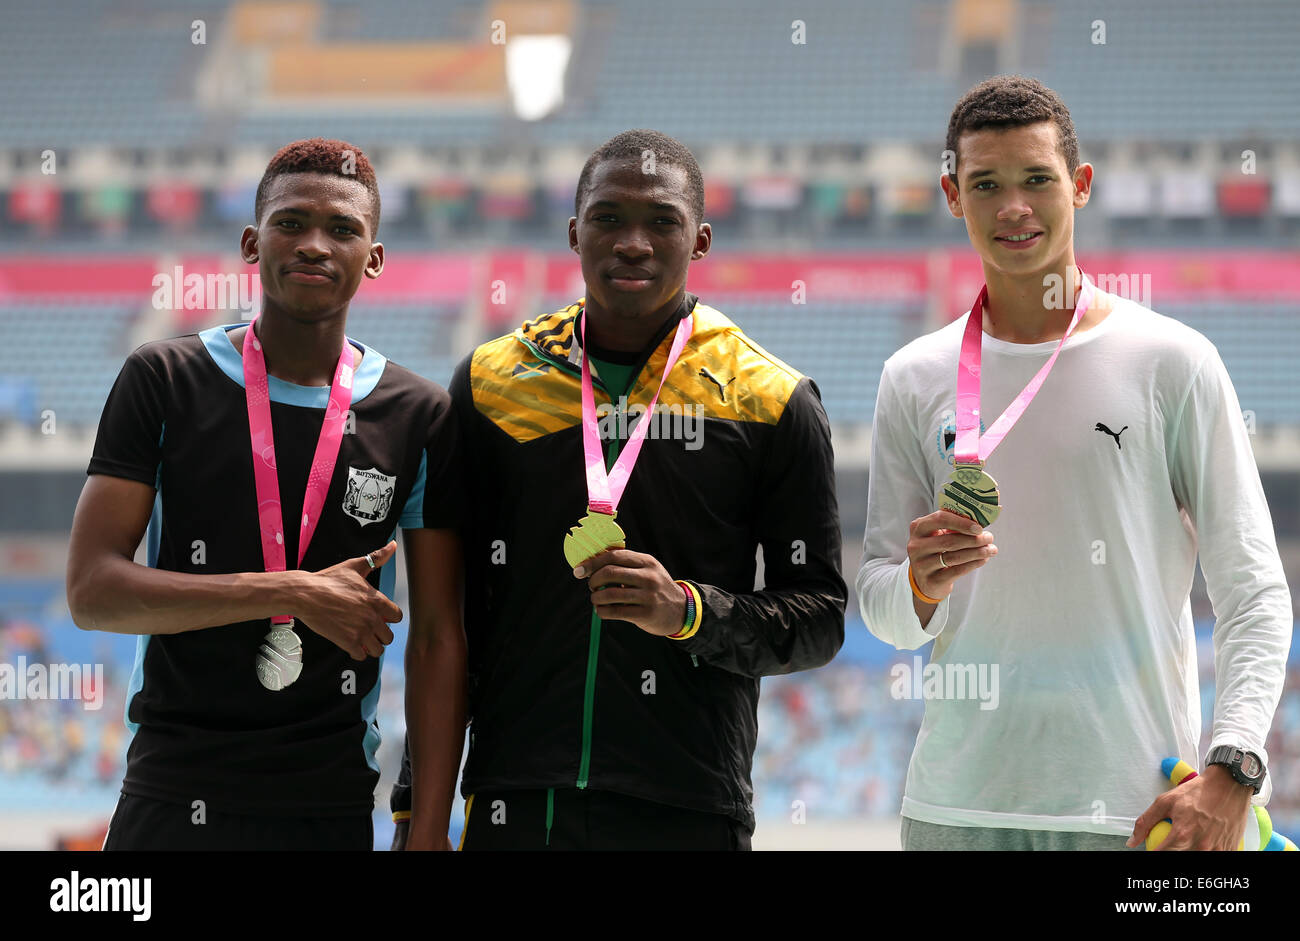 Nanjing, China's Jiangsu Province. 23rd Aug, 2014. Gold medalist Martin Manley (C) of Jamaica, silver medalist Karabo Sibanda (L) of Botswana and bronze medalist Henry Delauze of Bahamas pose on the podium during the awarding ceremony of the men?s 400m Final of athletics event at the Nanjing 2014 Youth Olympic Games in Nanjing, capital of east China's Jiangsu Province, Aug. 23, 2014. Credit:  Yang Lei/Xinhua/Alamy Live News Stock Photo